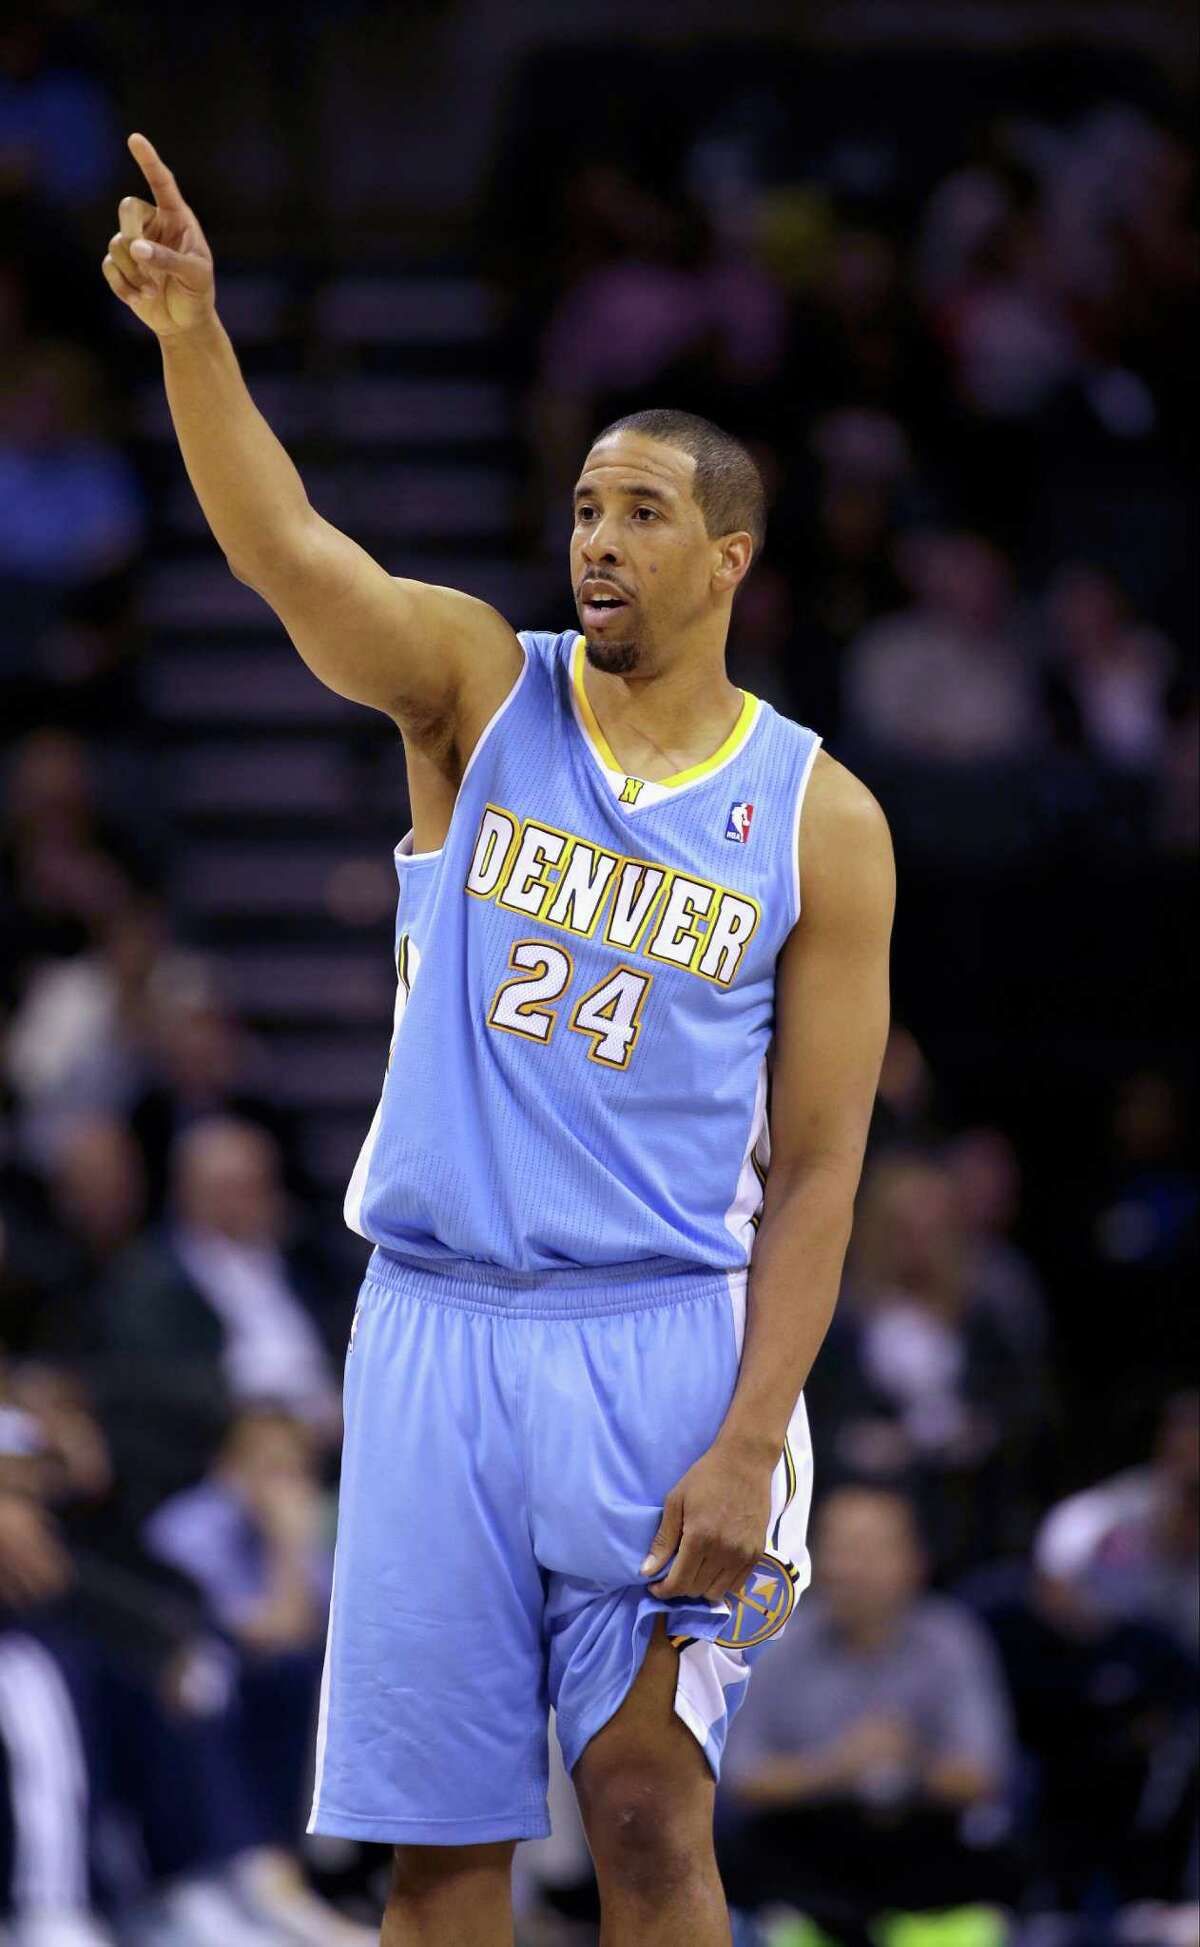 Eighteen years ago, Spurs' Andre Miller played on NCAA's biggest